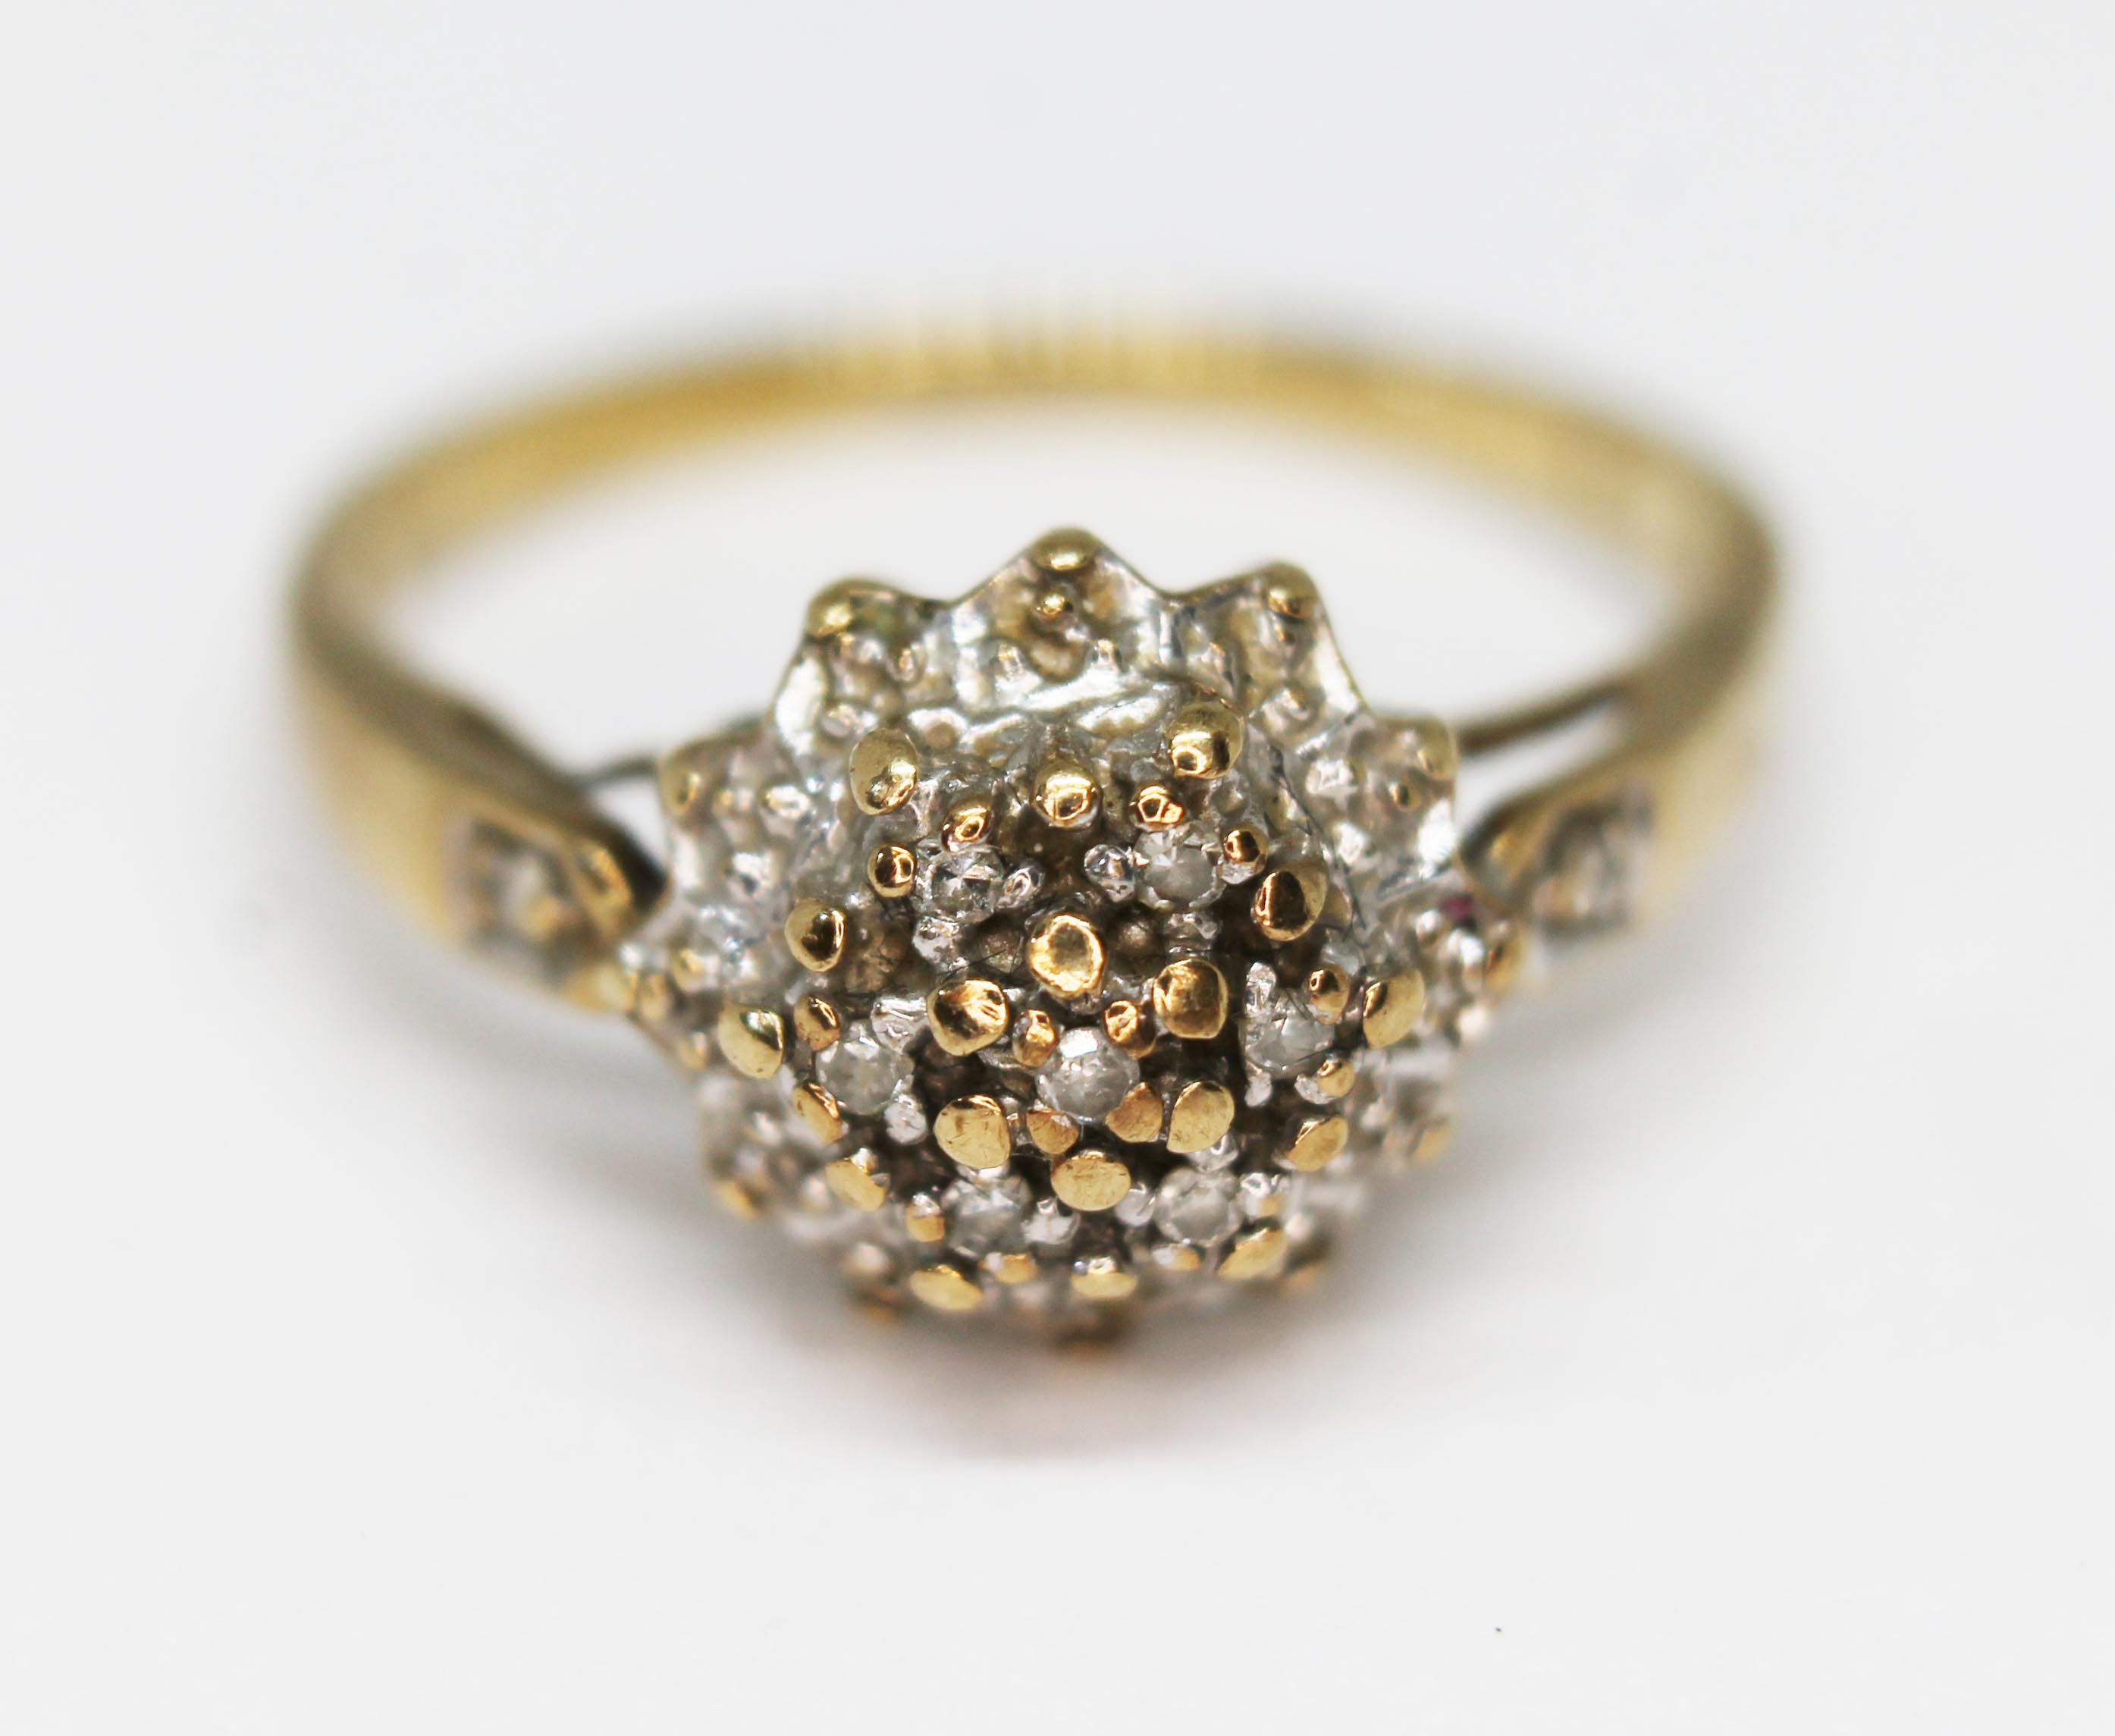 A hallmarked 9ct gold diamond cluster ring, gross wt. 2.2g, size M.